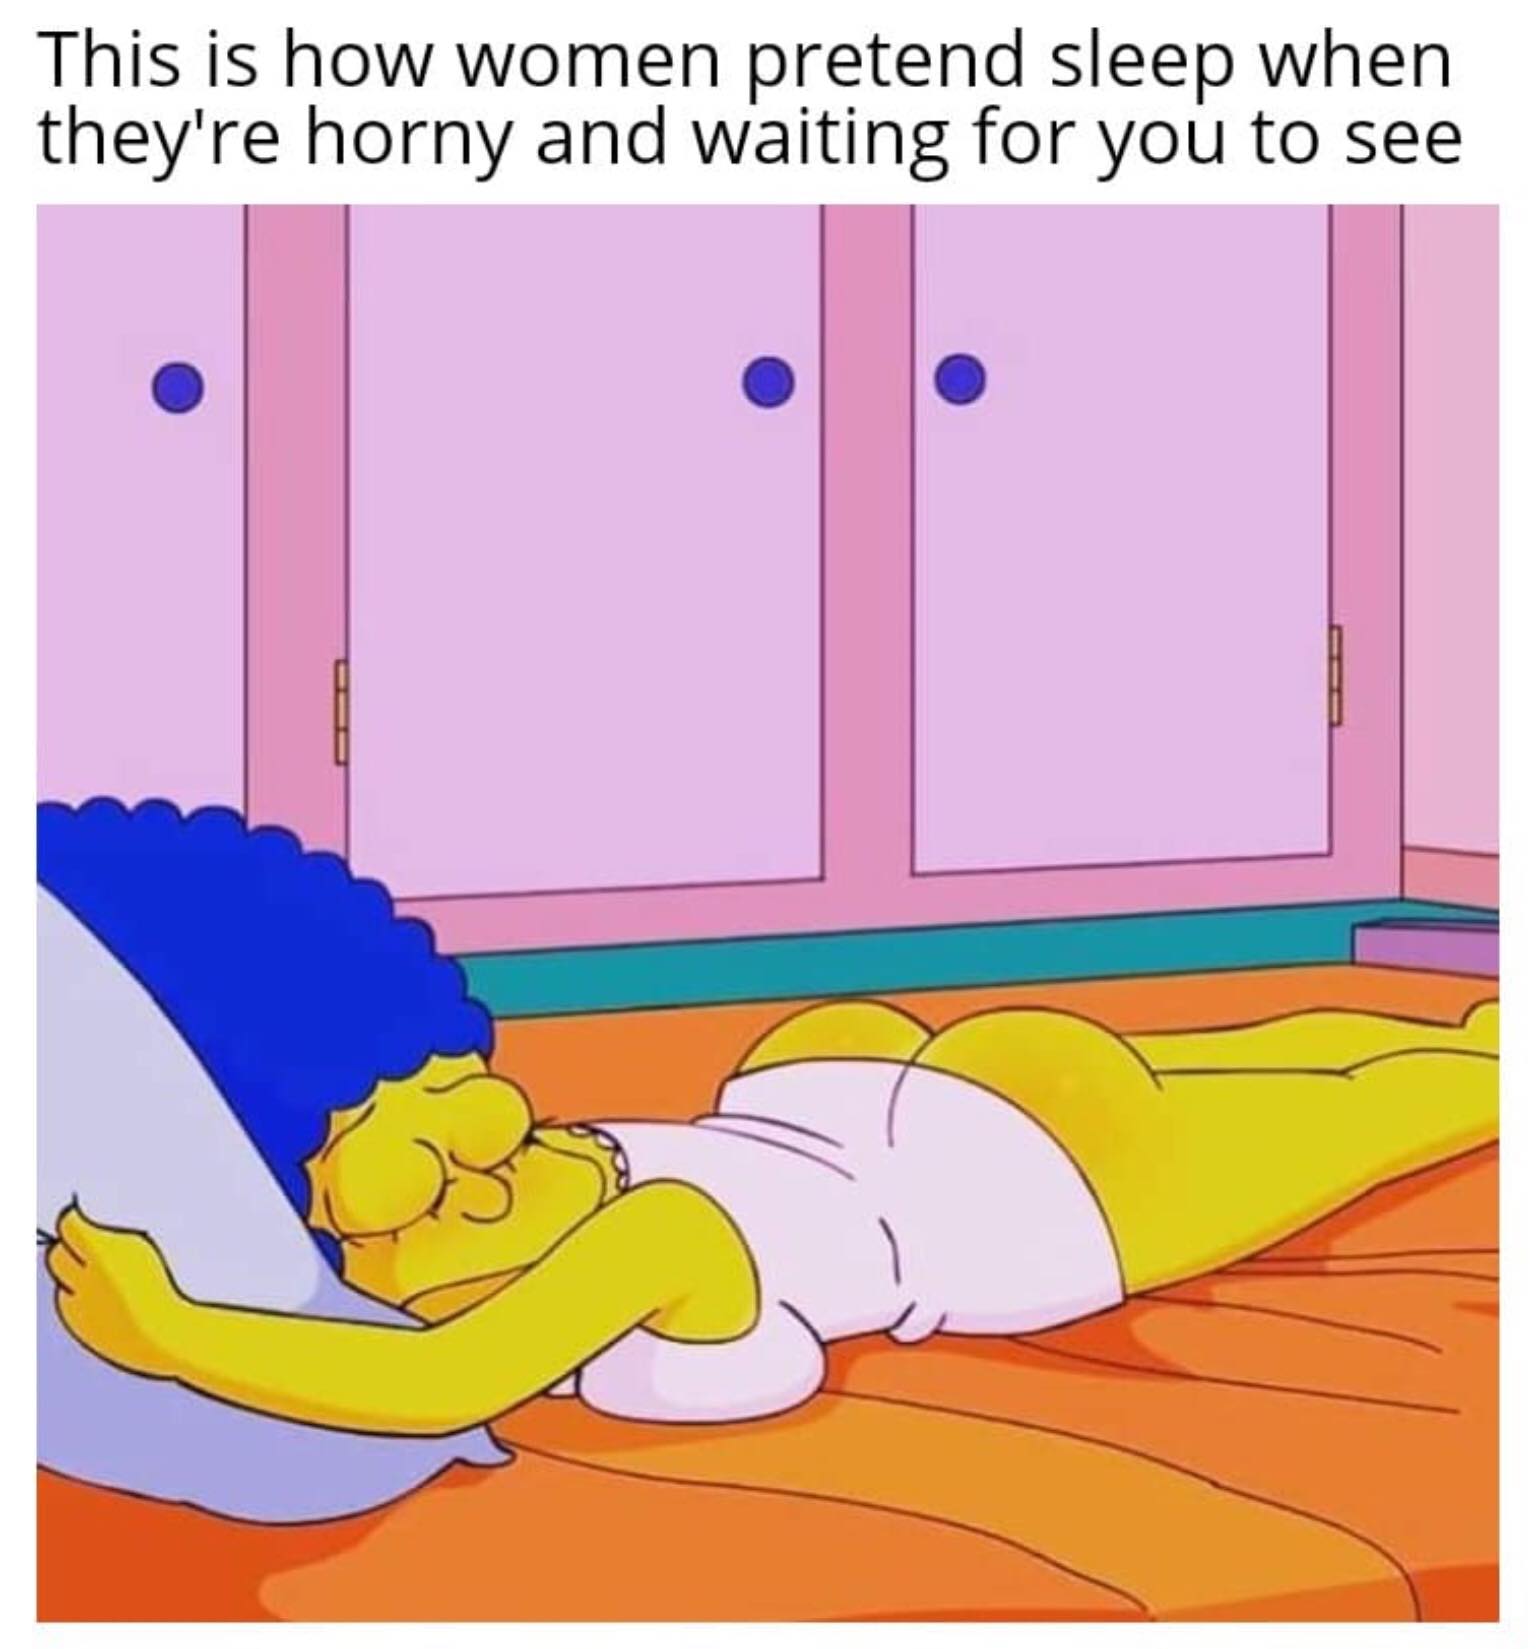 cartoon - This is how women pretend sleep when they're horny and waiting for you to see